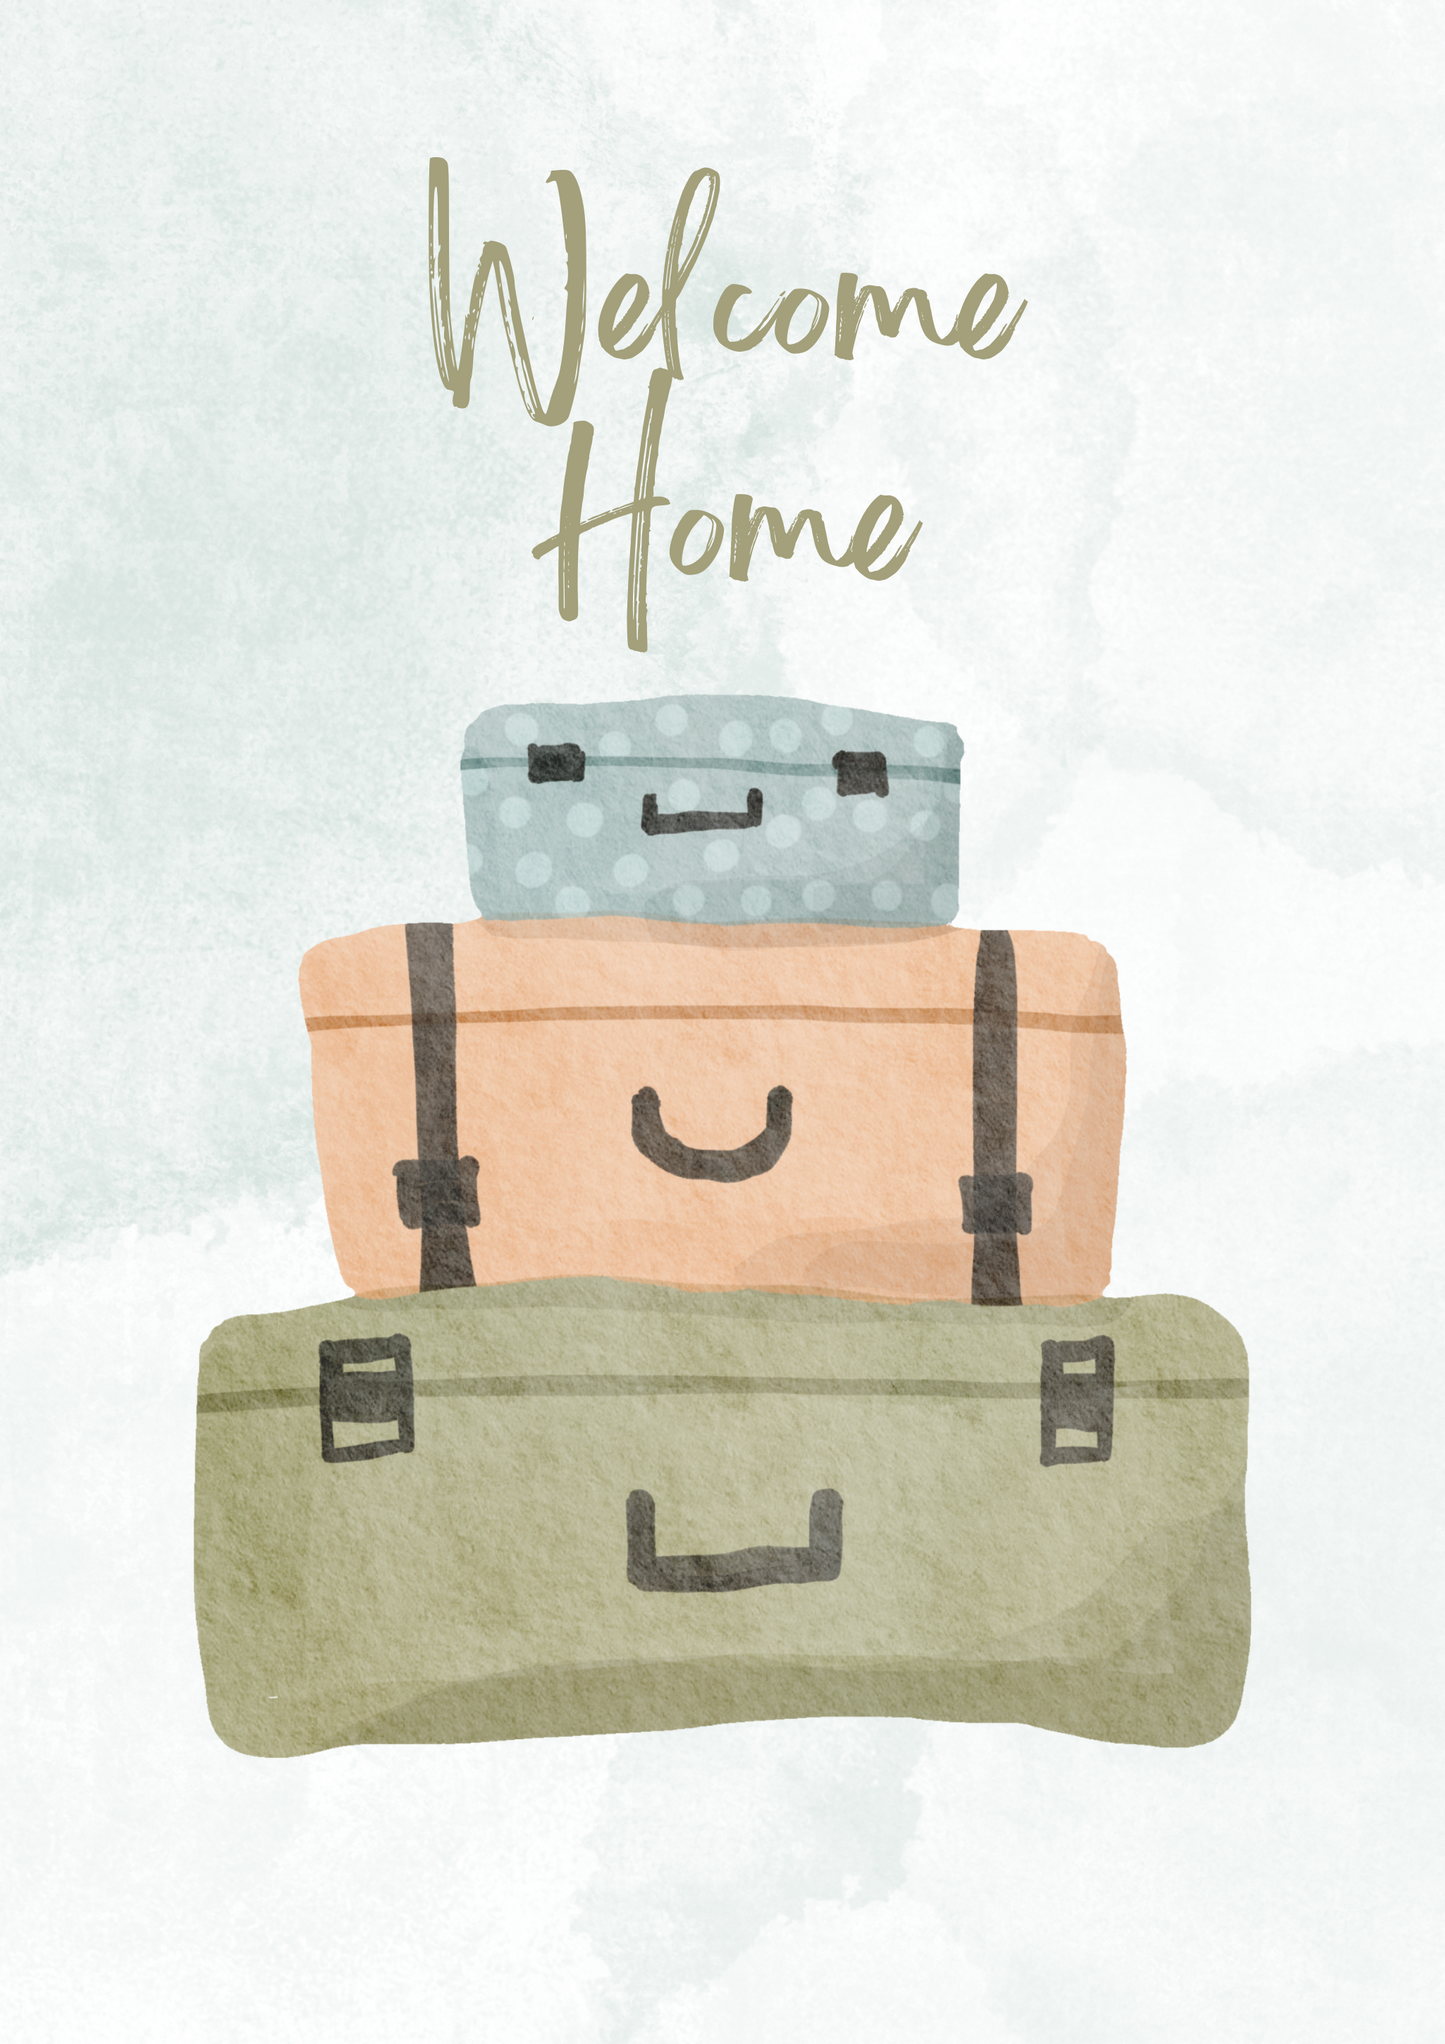 Welcome Home Luggage Business